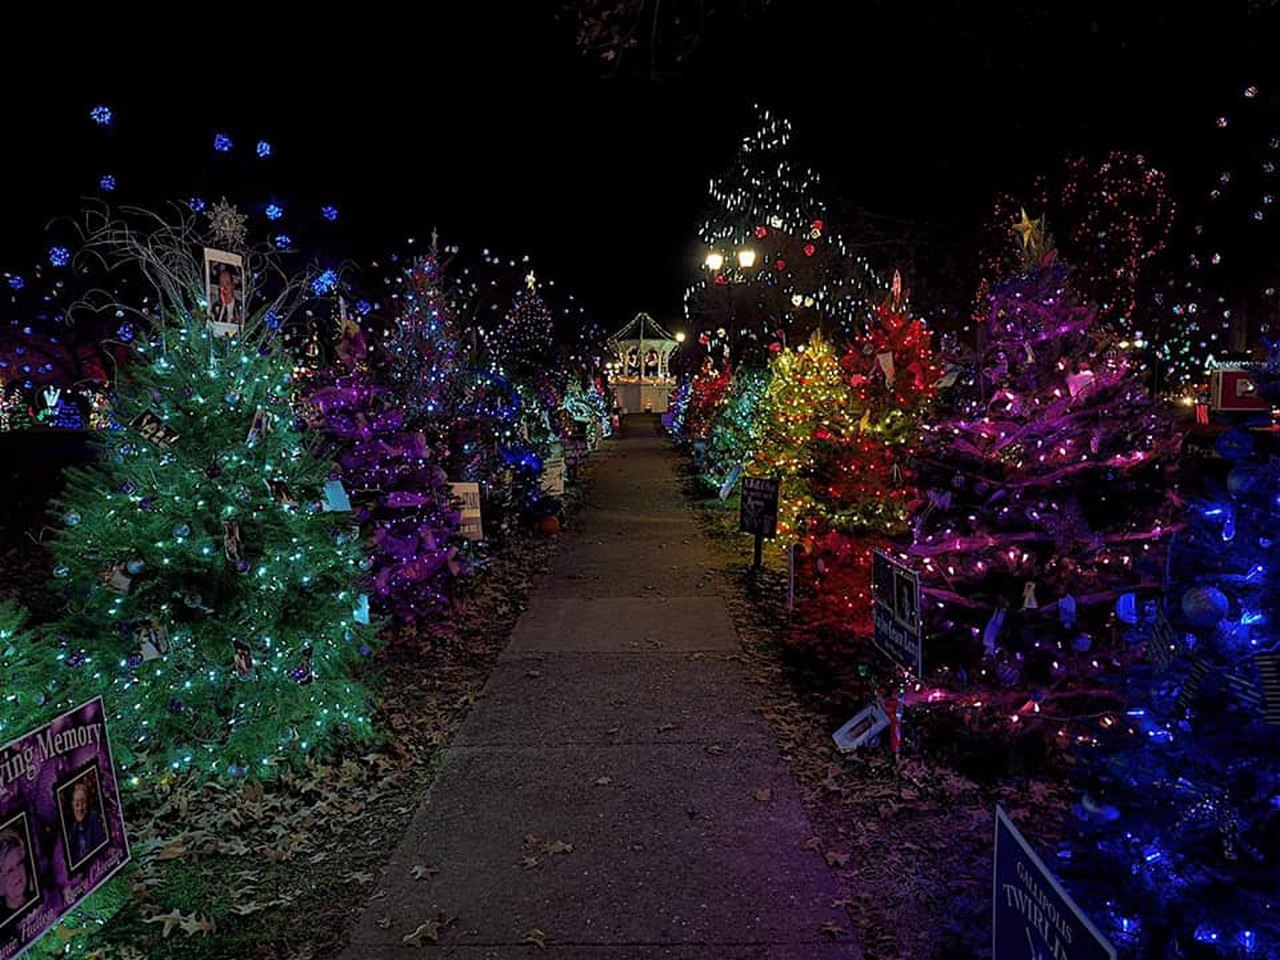 Best Christmas Tree Trail In Ohio Gallipolis in Lights